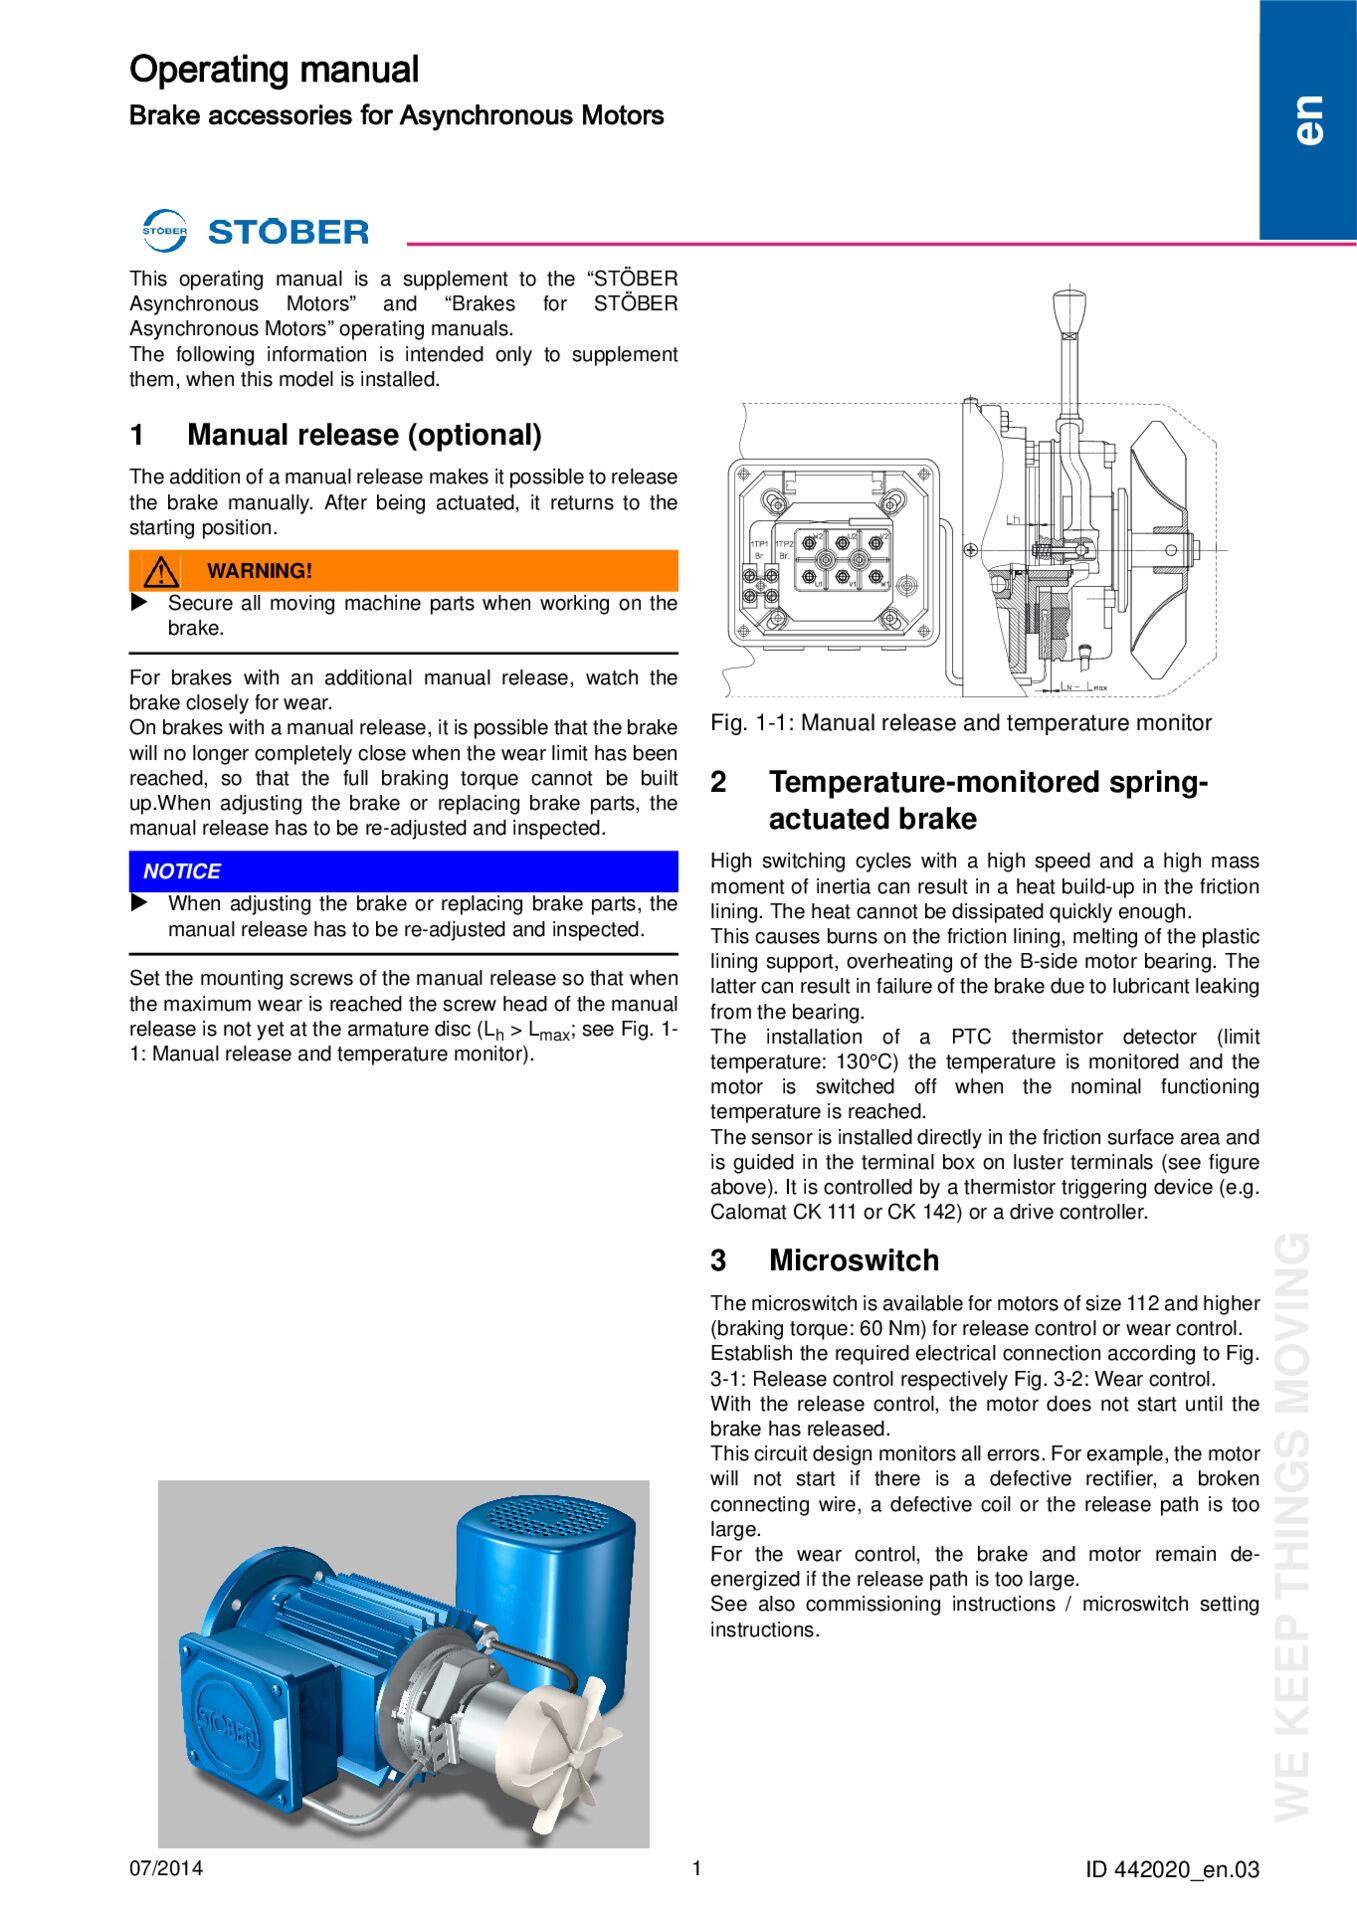 Operating instructions Brake accessories for Asynchronous Motors